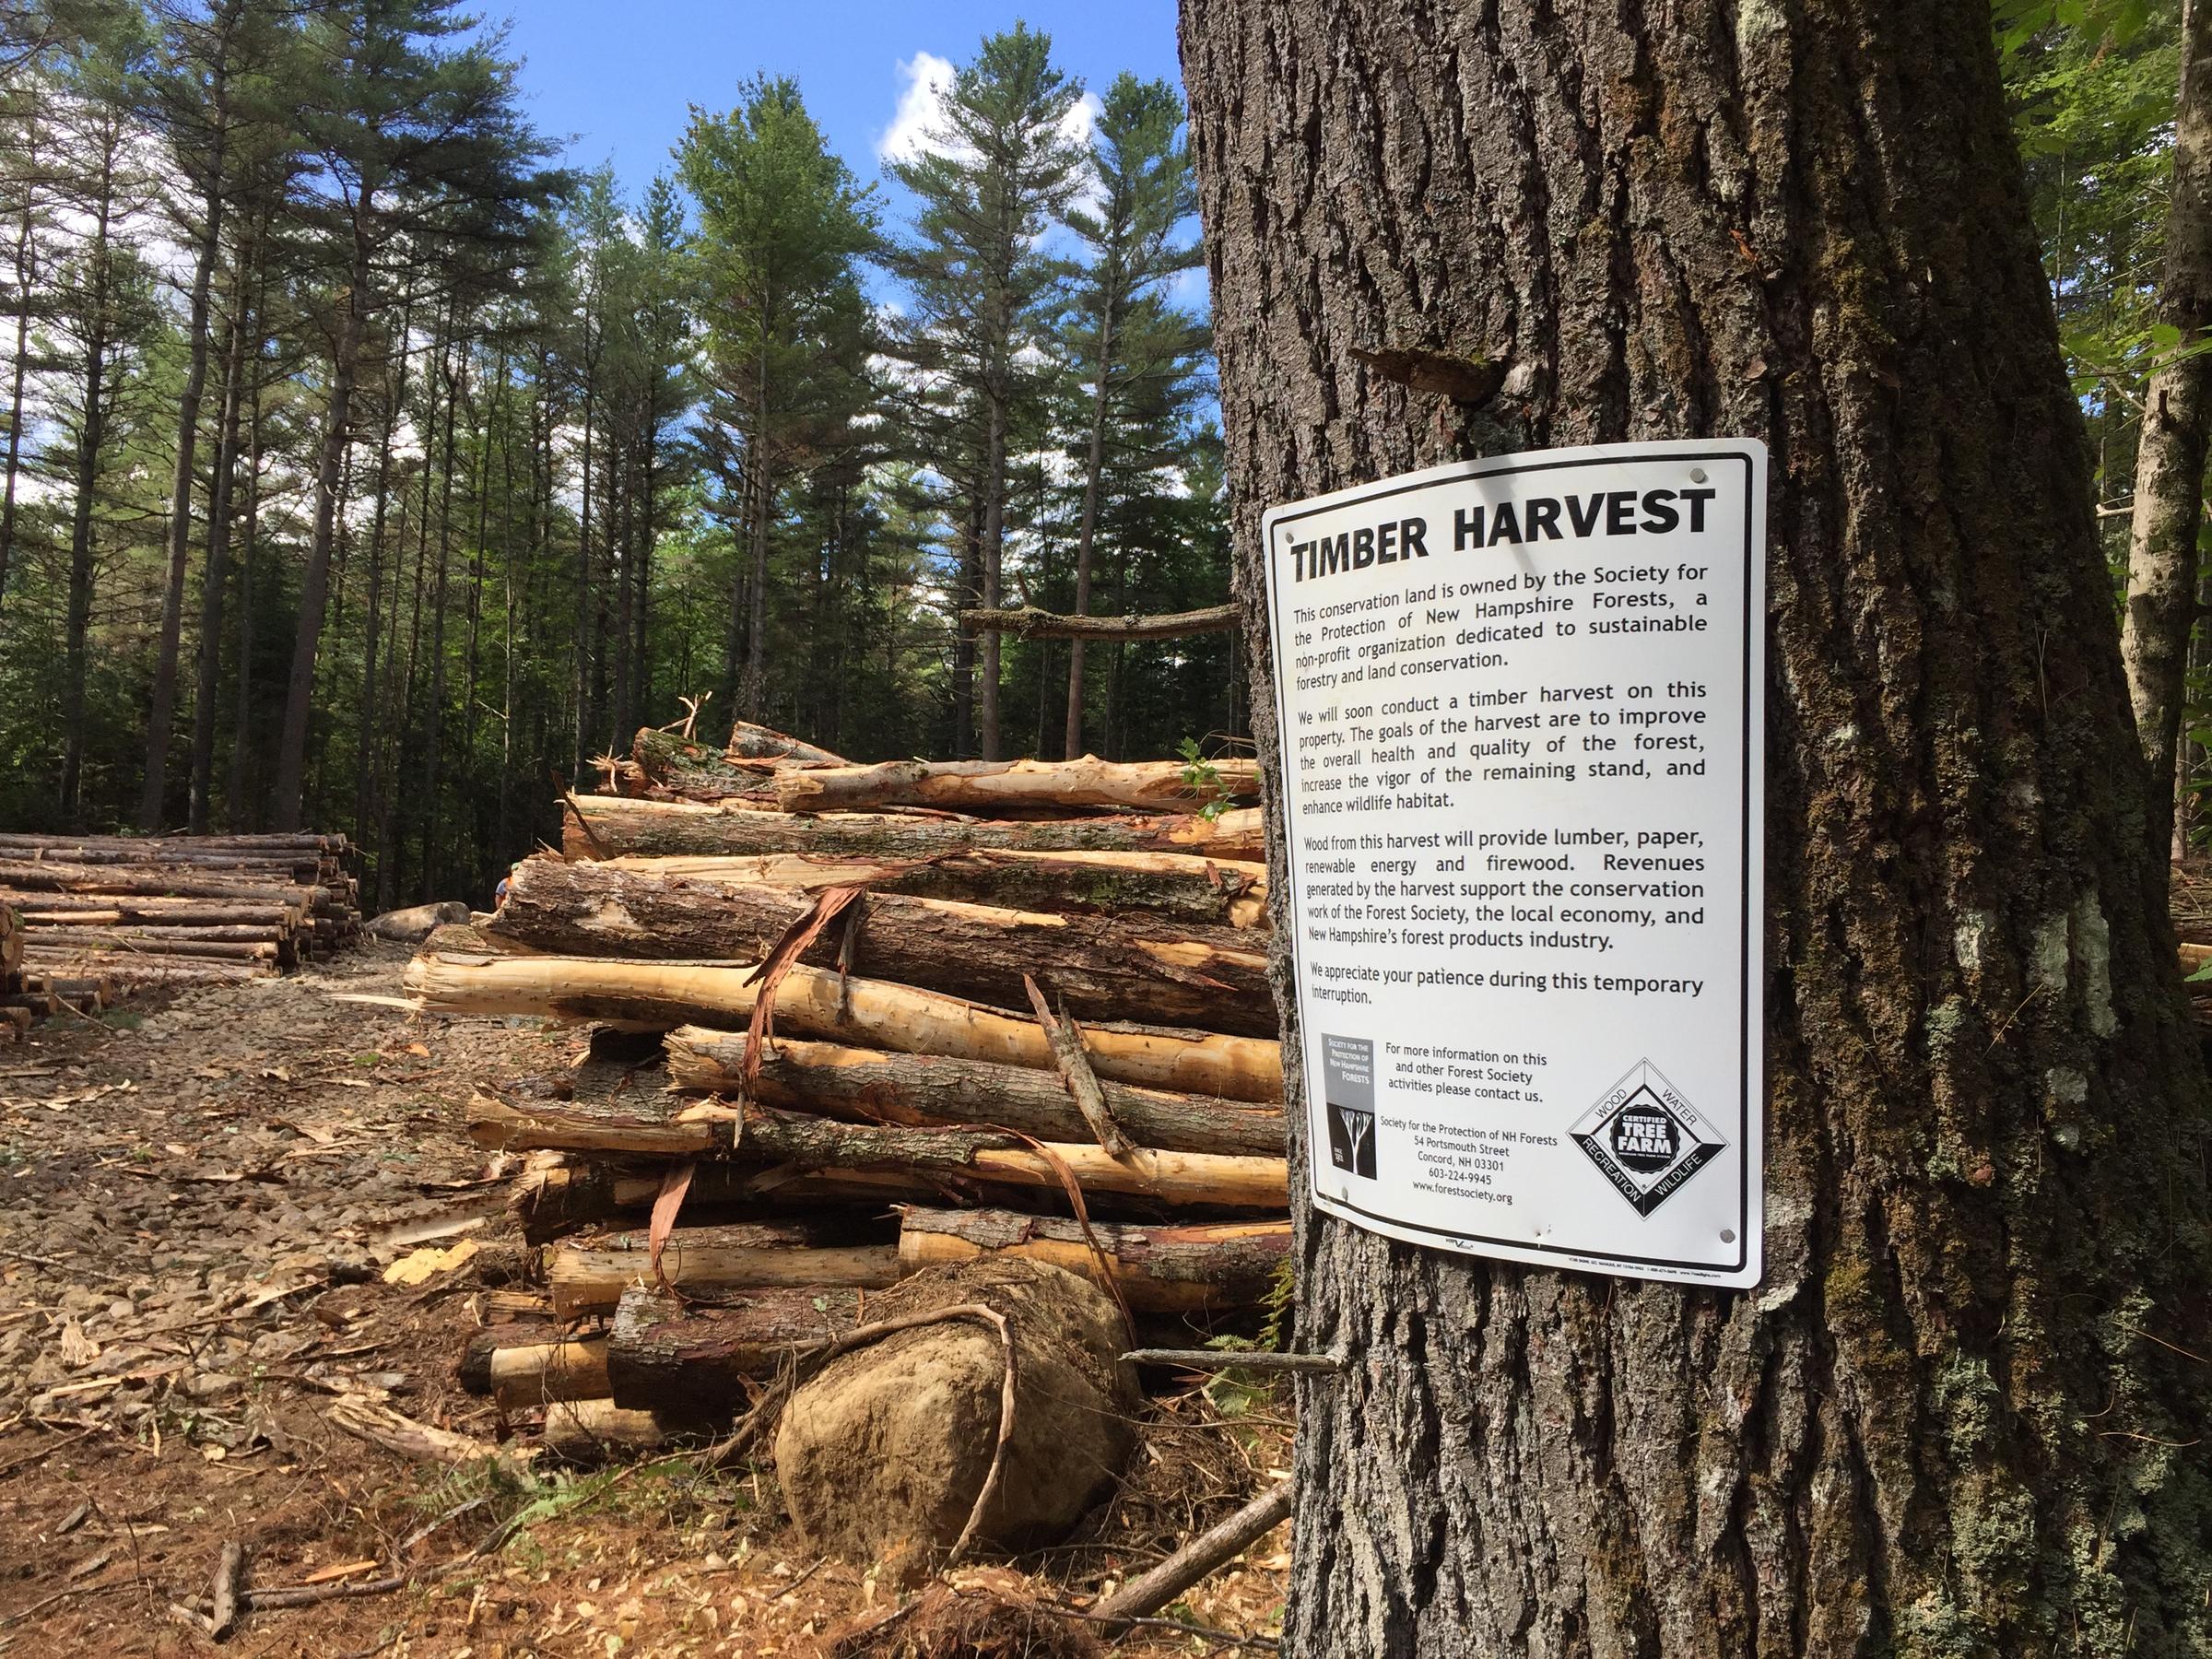 A Timber Harvest: NH Public Radio Educates on Value of Forests